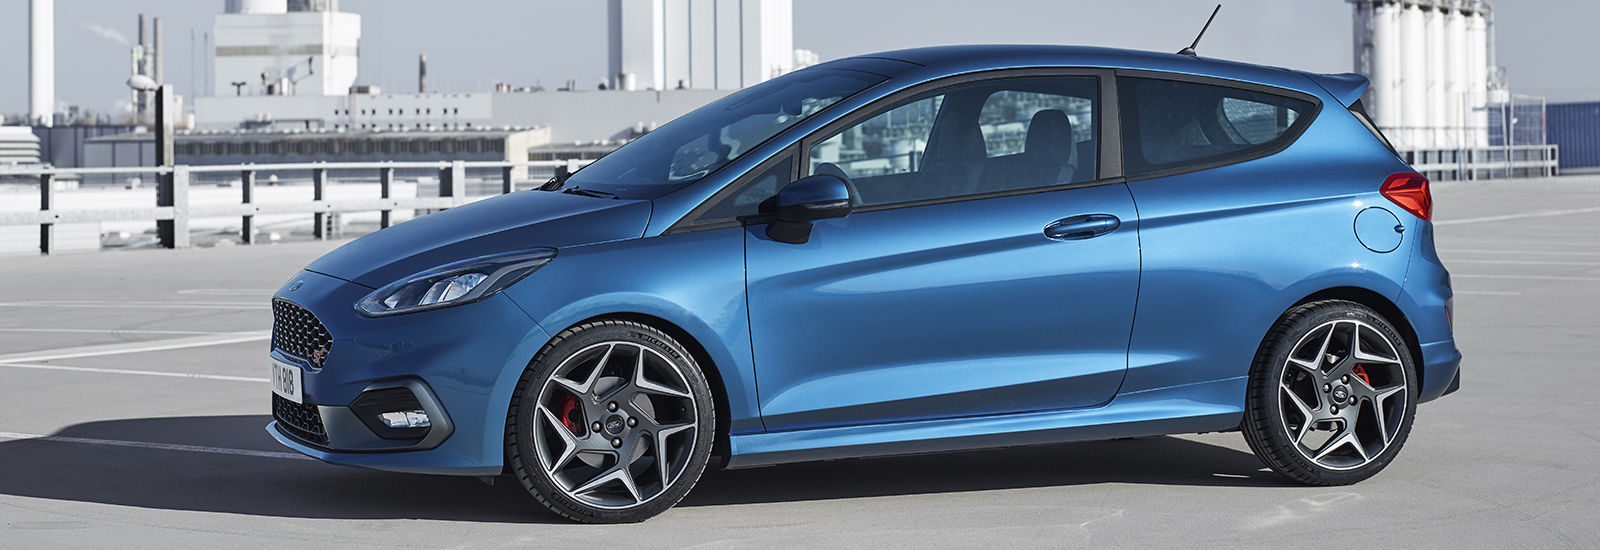 2014 Ford Fiesta ST2 Accelerates Faster in Britain